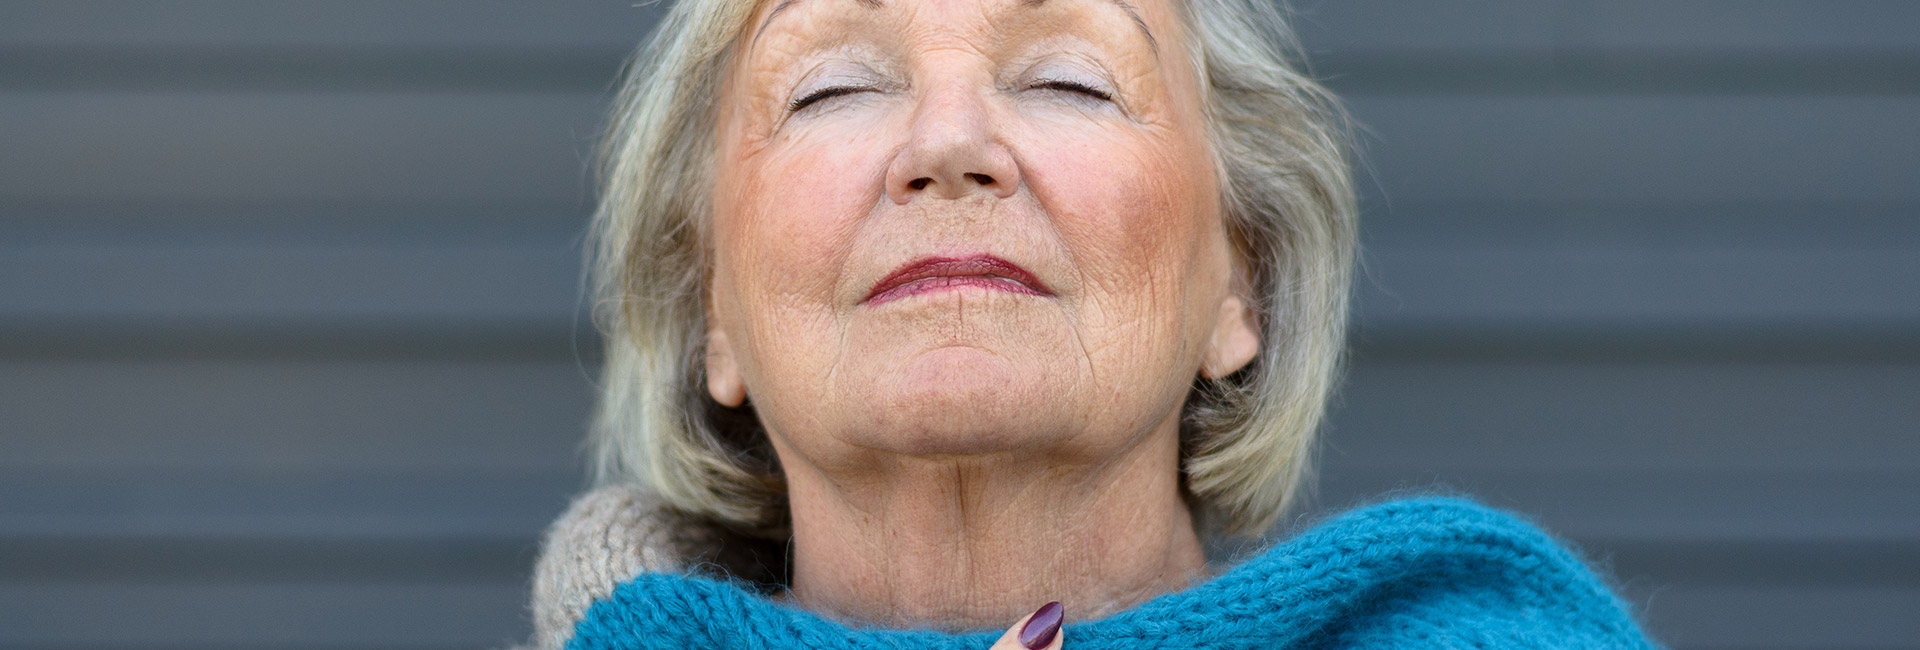 An older woman closing her eyes and taking a cleansing breath